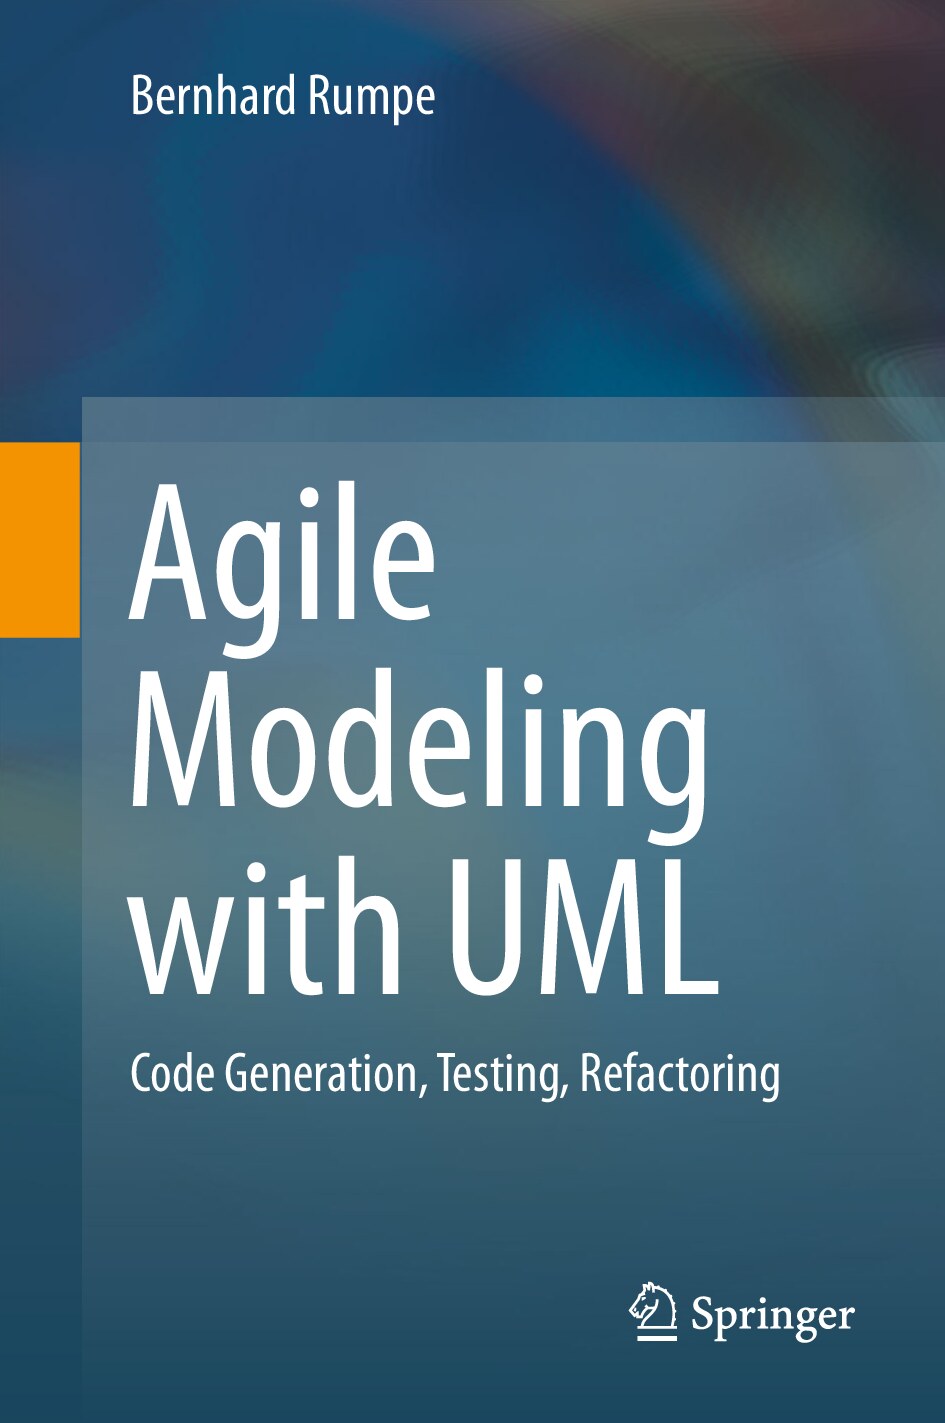 Agile Modeling With UML: Code Generation, Testing, Refactoring